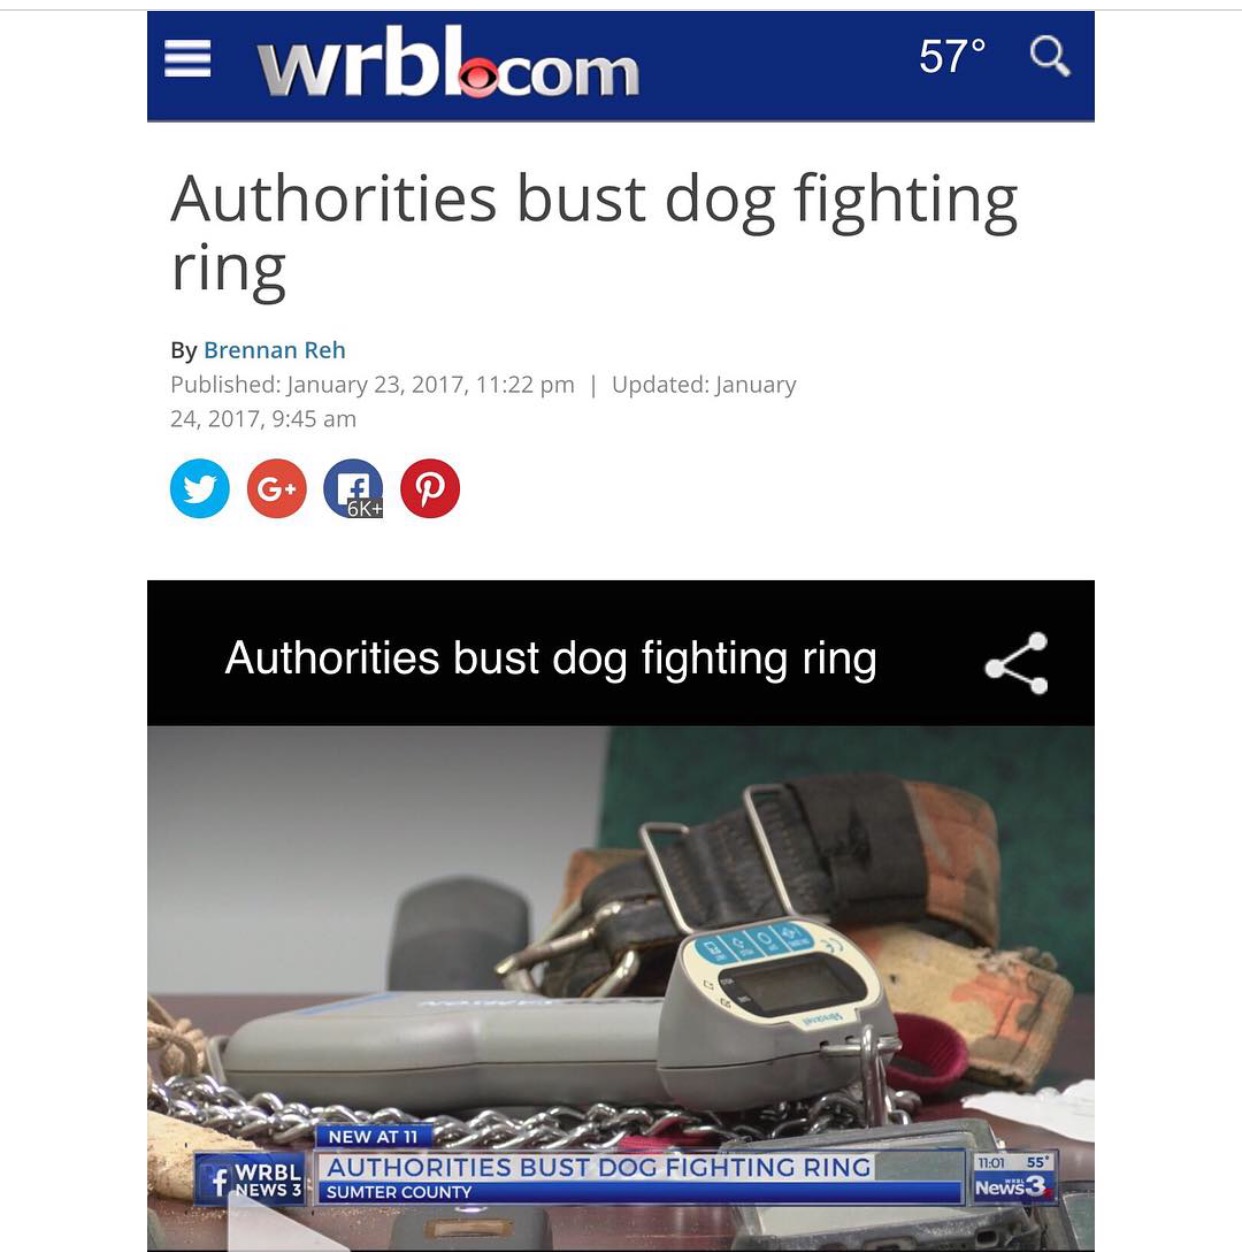 DOGFIGHTING CONTINUES. IT MUST END.